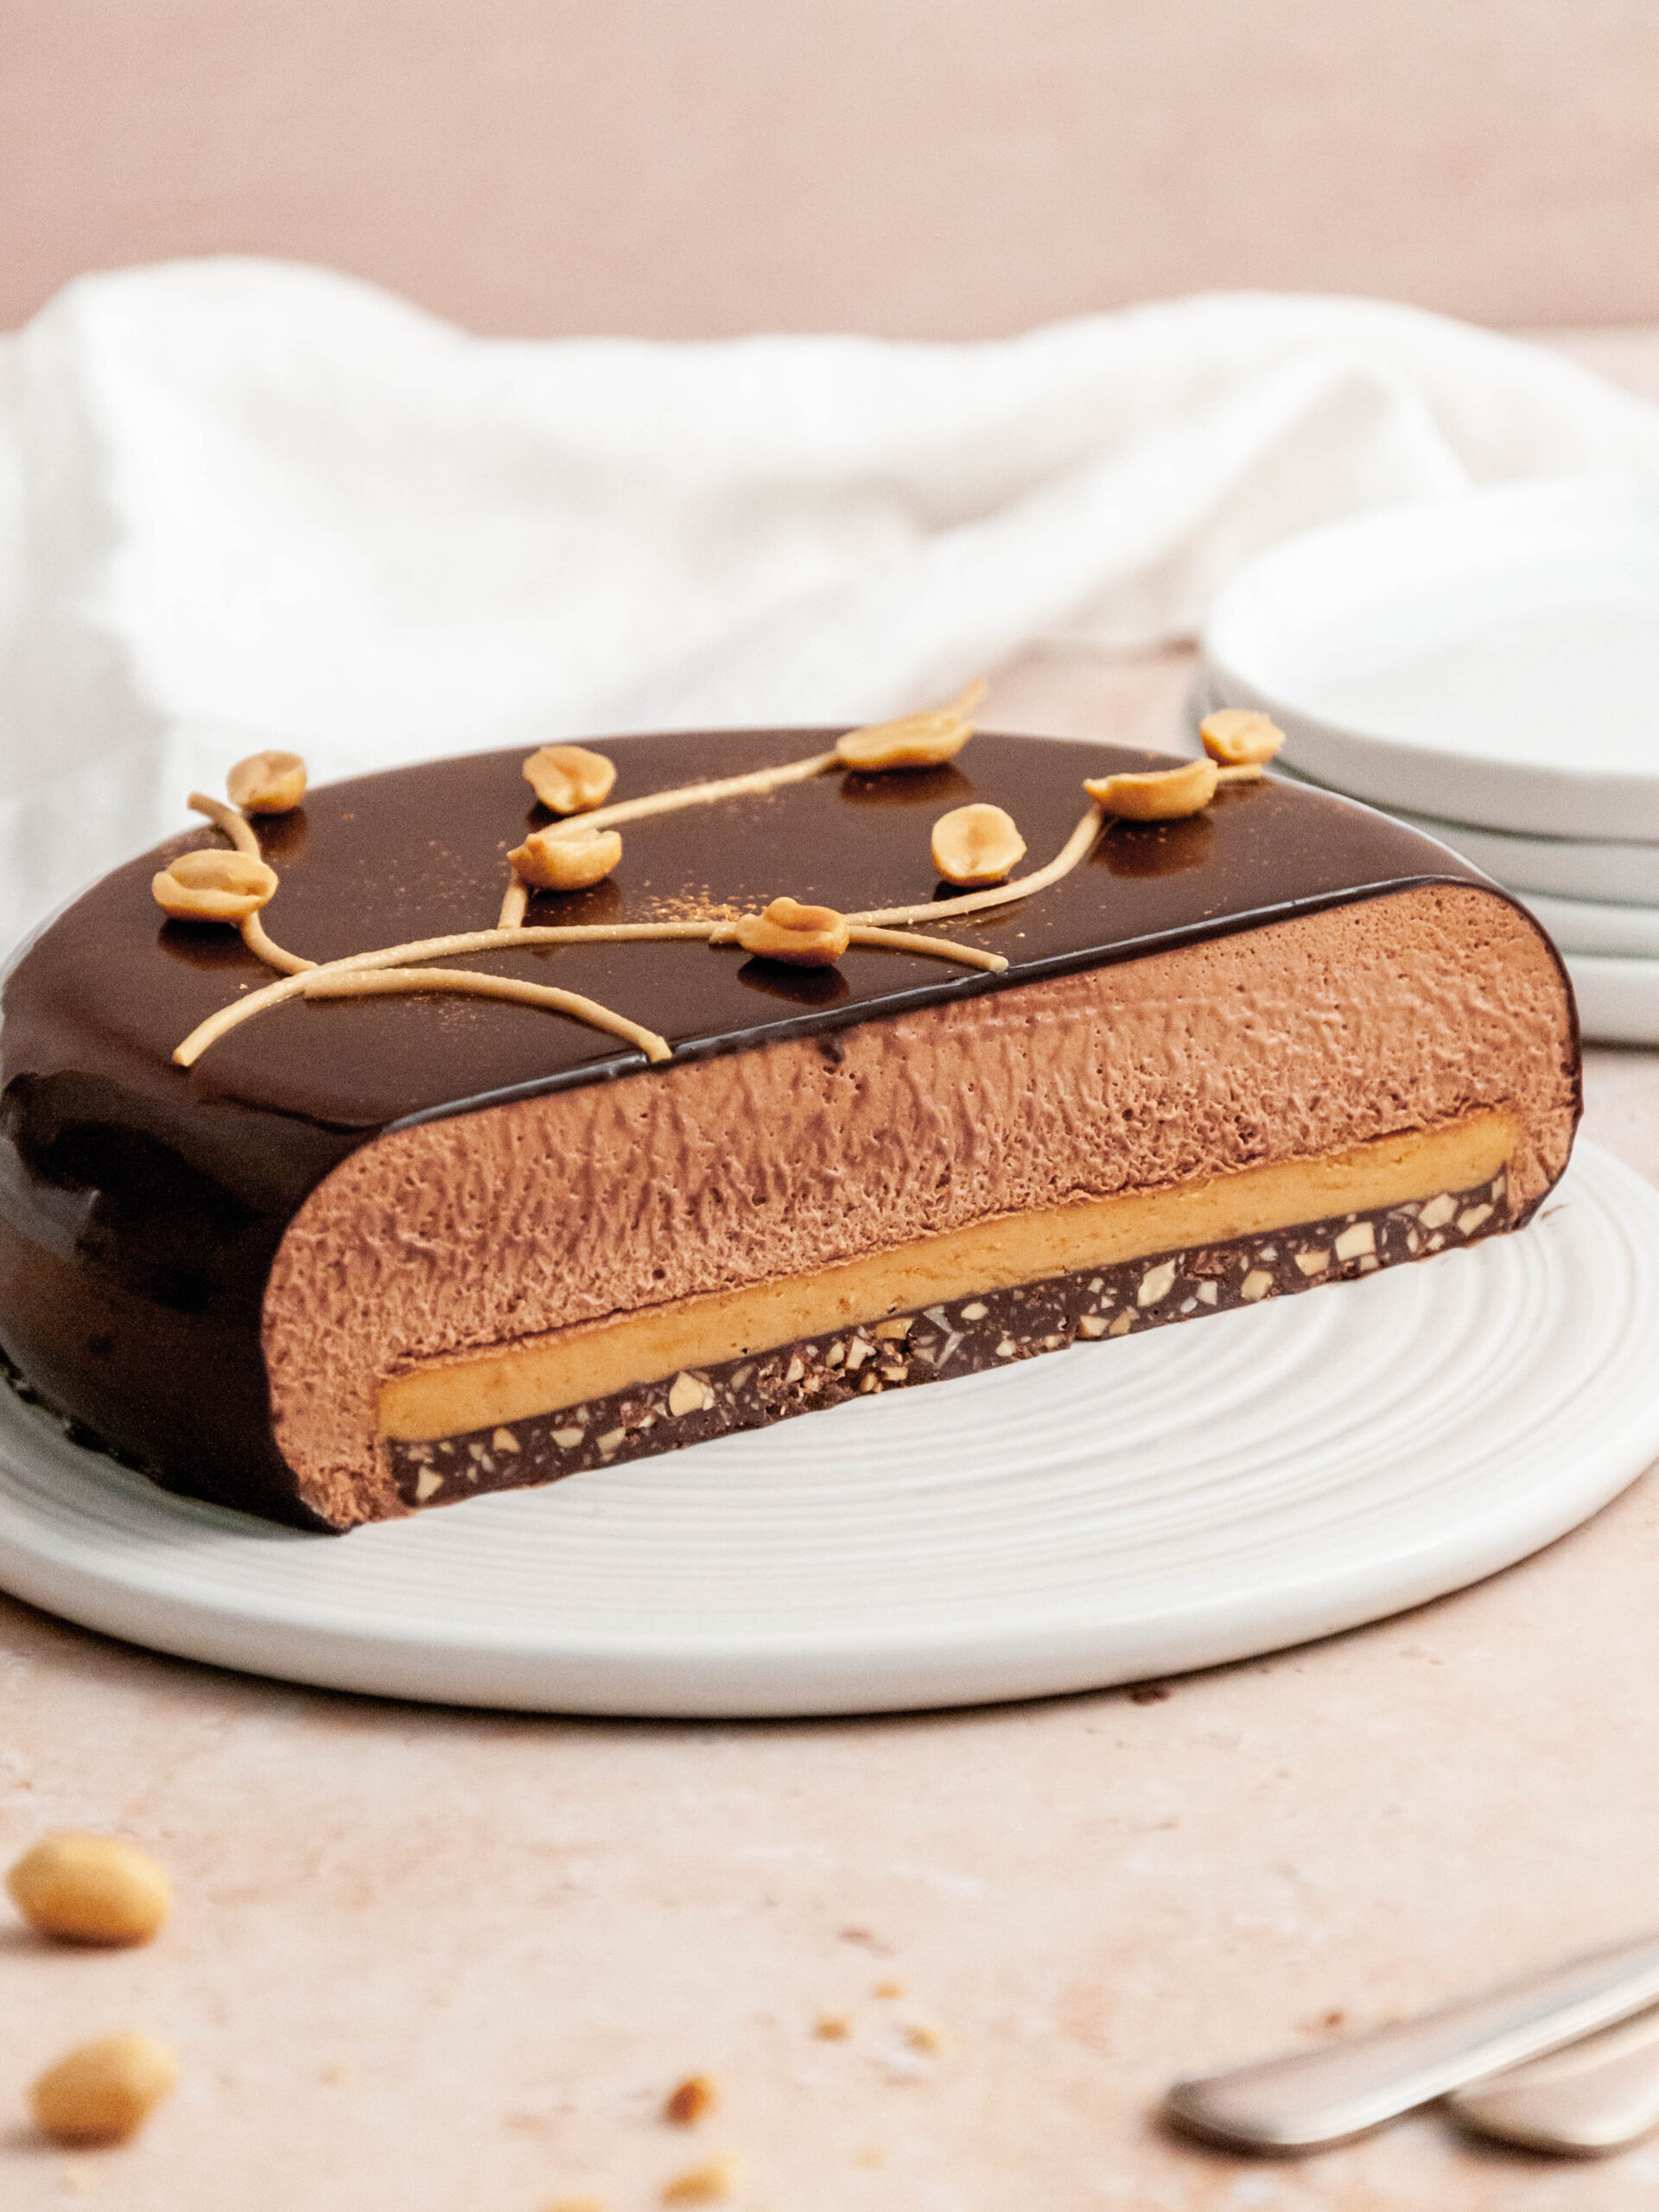 peanut butter and dark chocolate mousse cake